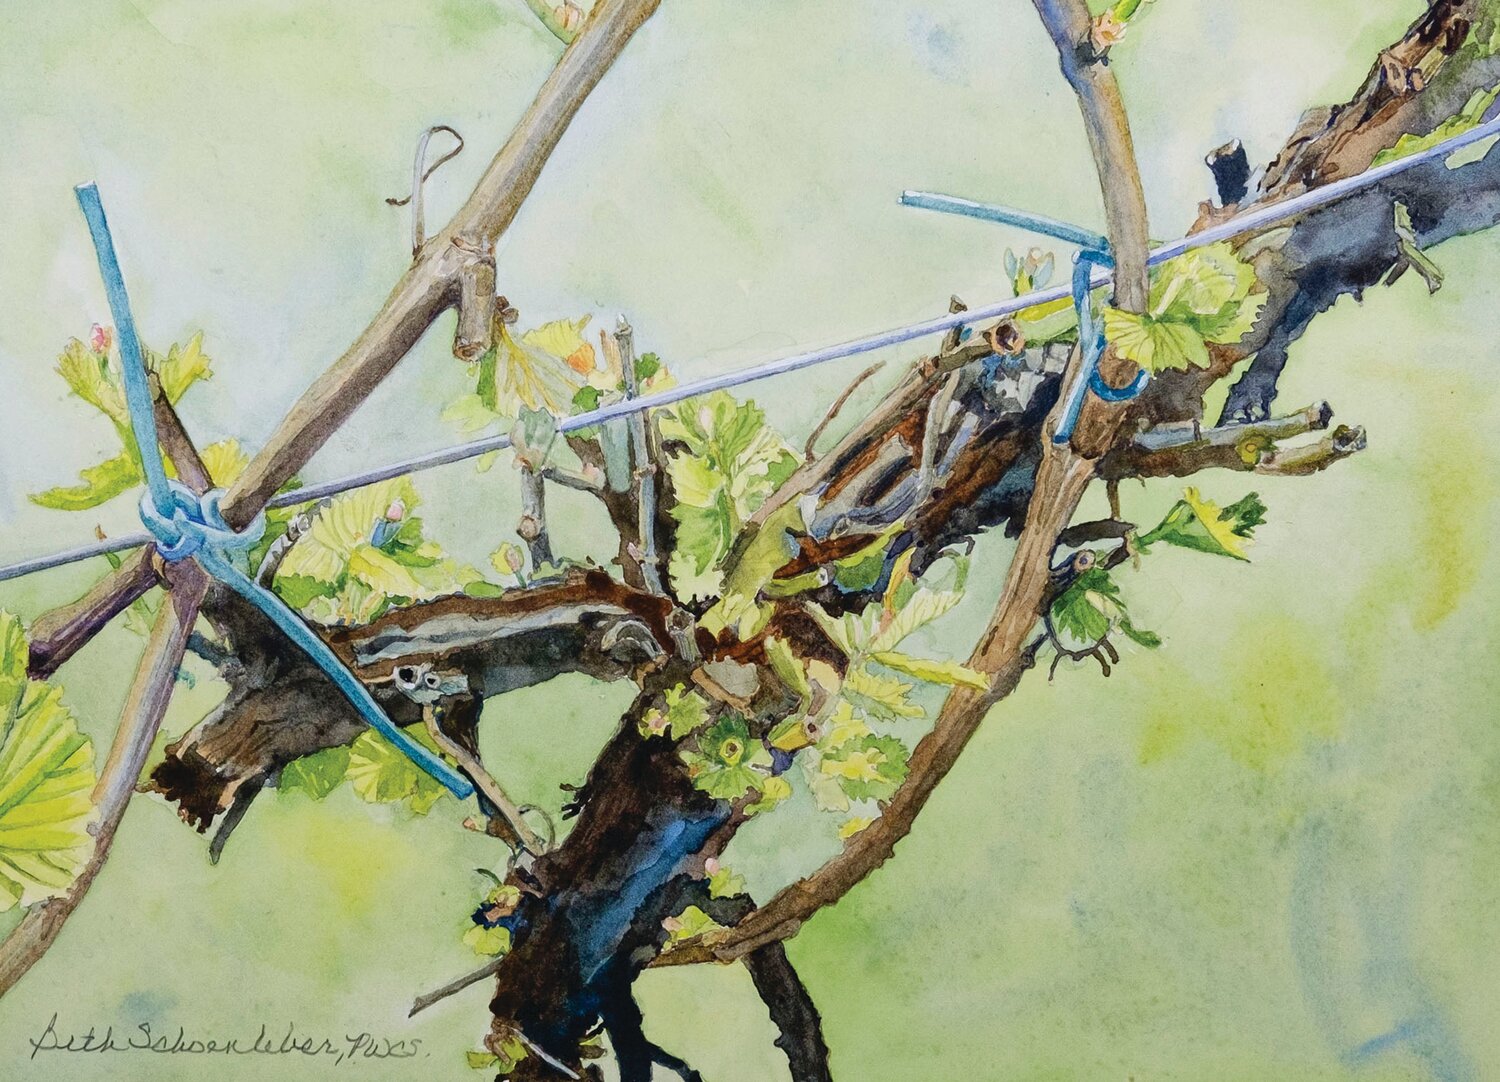 “Spring Bud Break,” a watercolor by Beth Schoenleber, was done at Wycombe Vineyards. It will be part of the Wine & Art Trail Exhibition, on weekends from Sept. 9 through Oct. 1, sponsored by the Arts & Cultural Council at Freeman Hall in Doylestown.